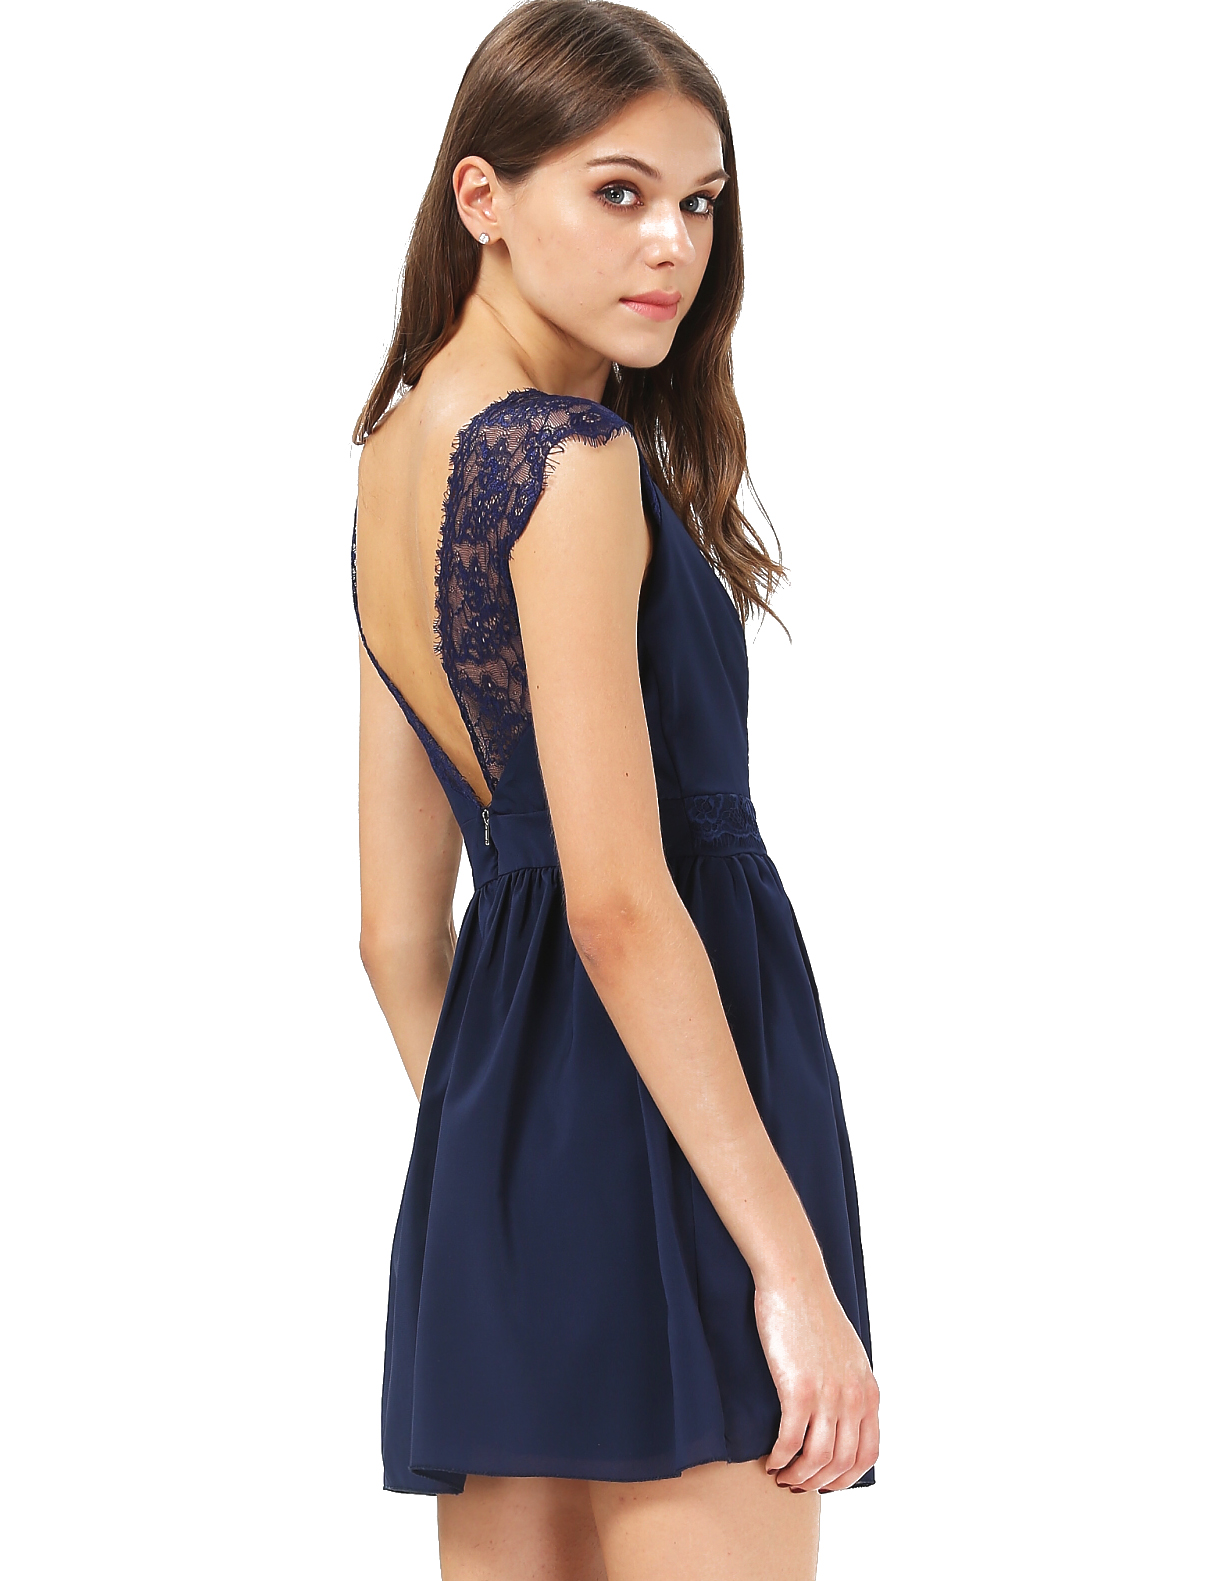 Lace Dress Backless & Show Your Elegance In 2017